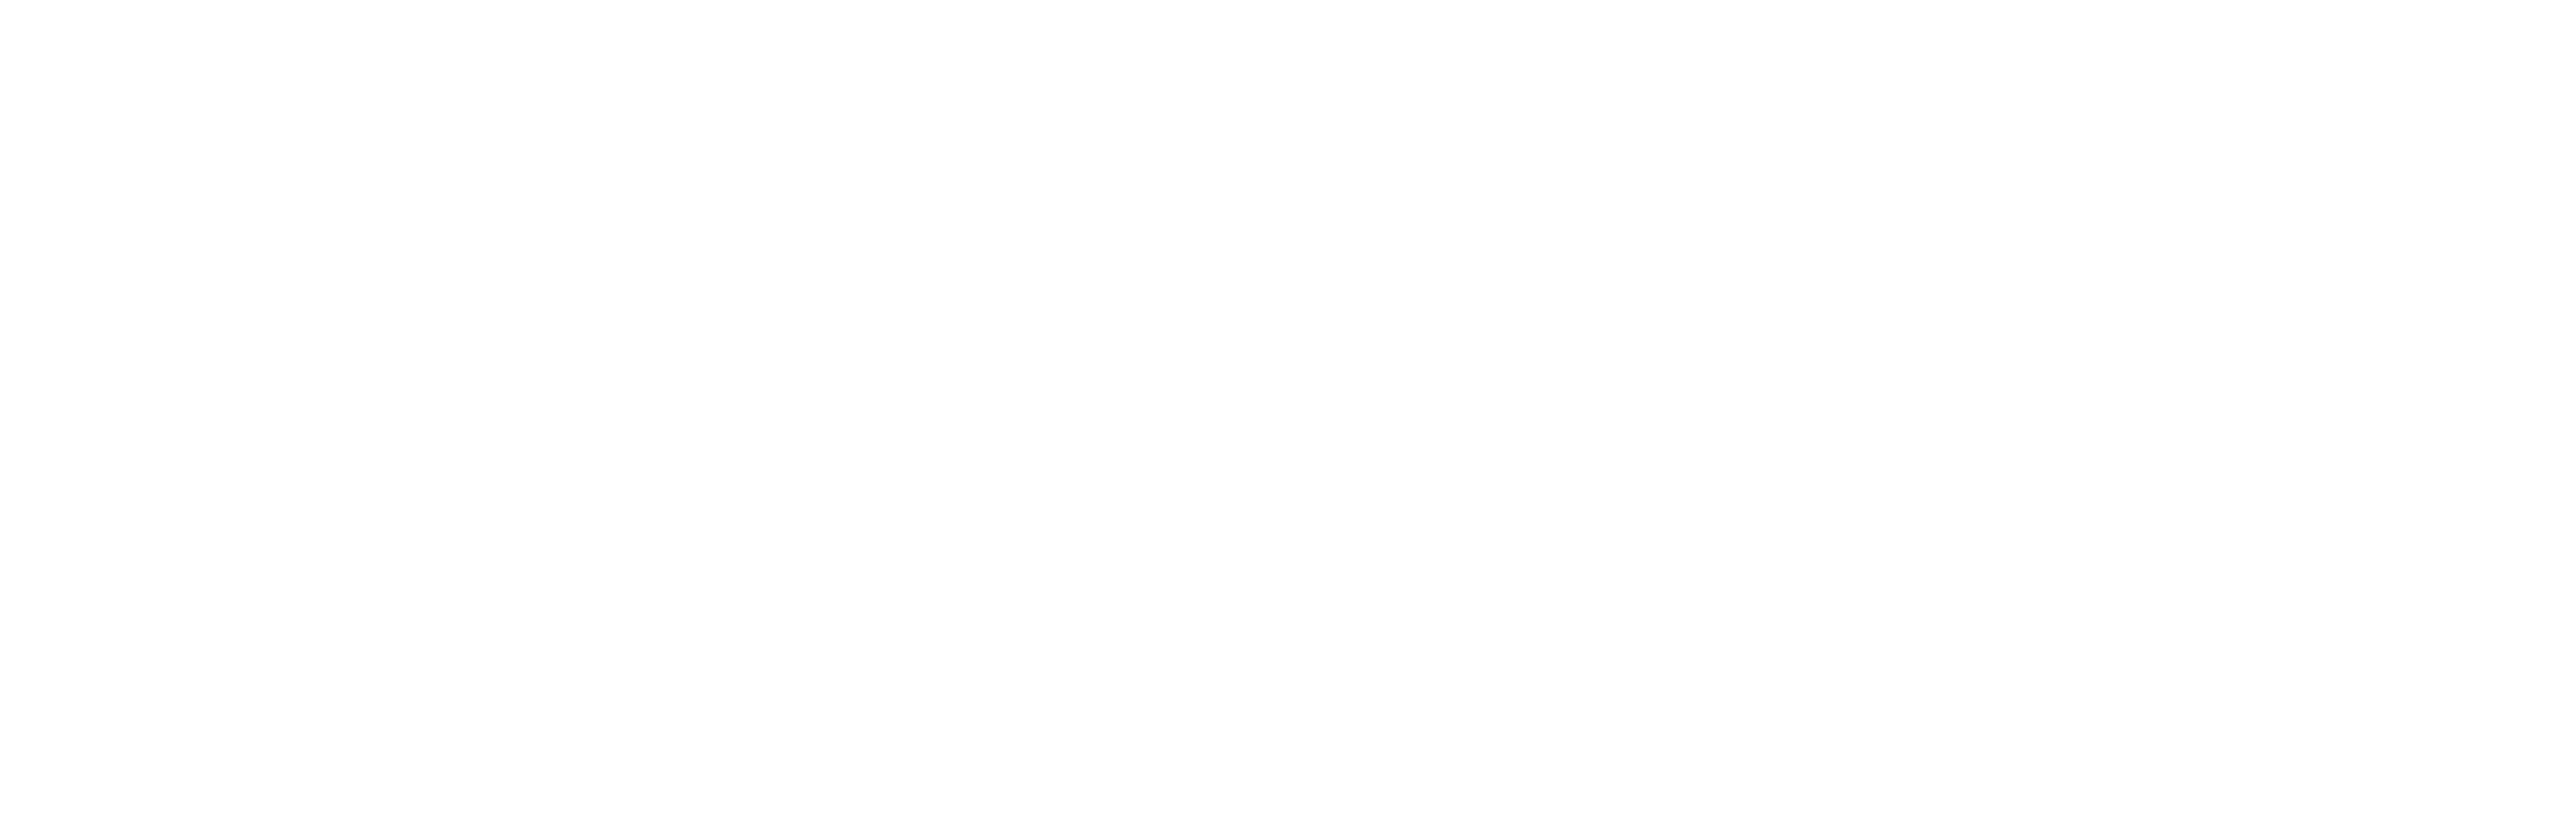 Couponorg Footer Logo